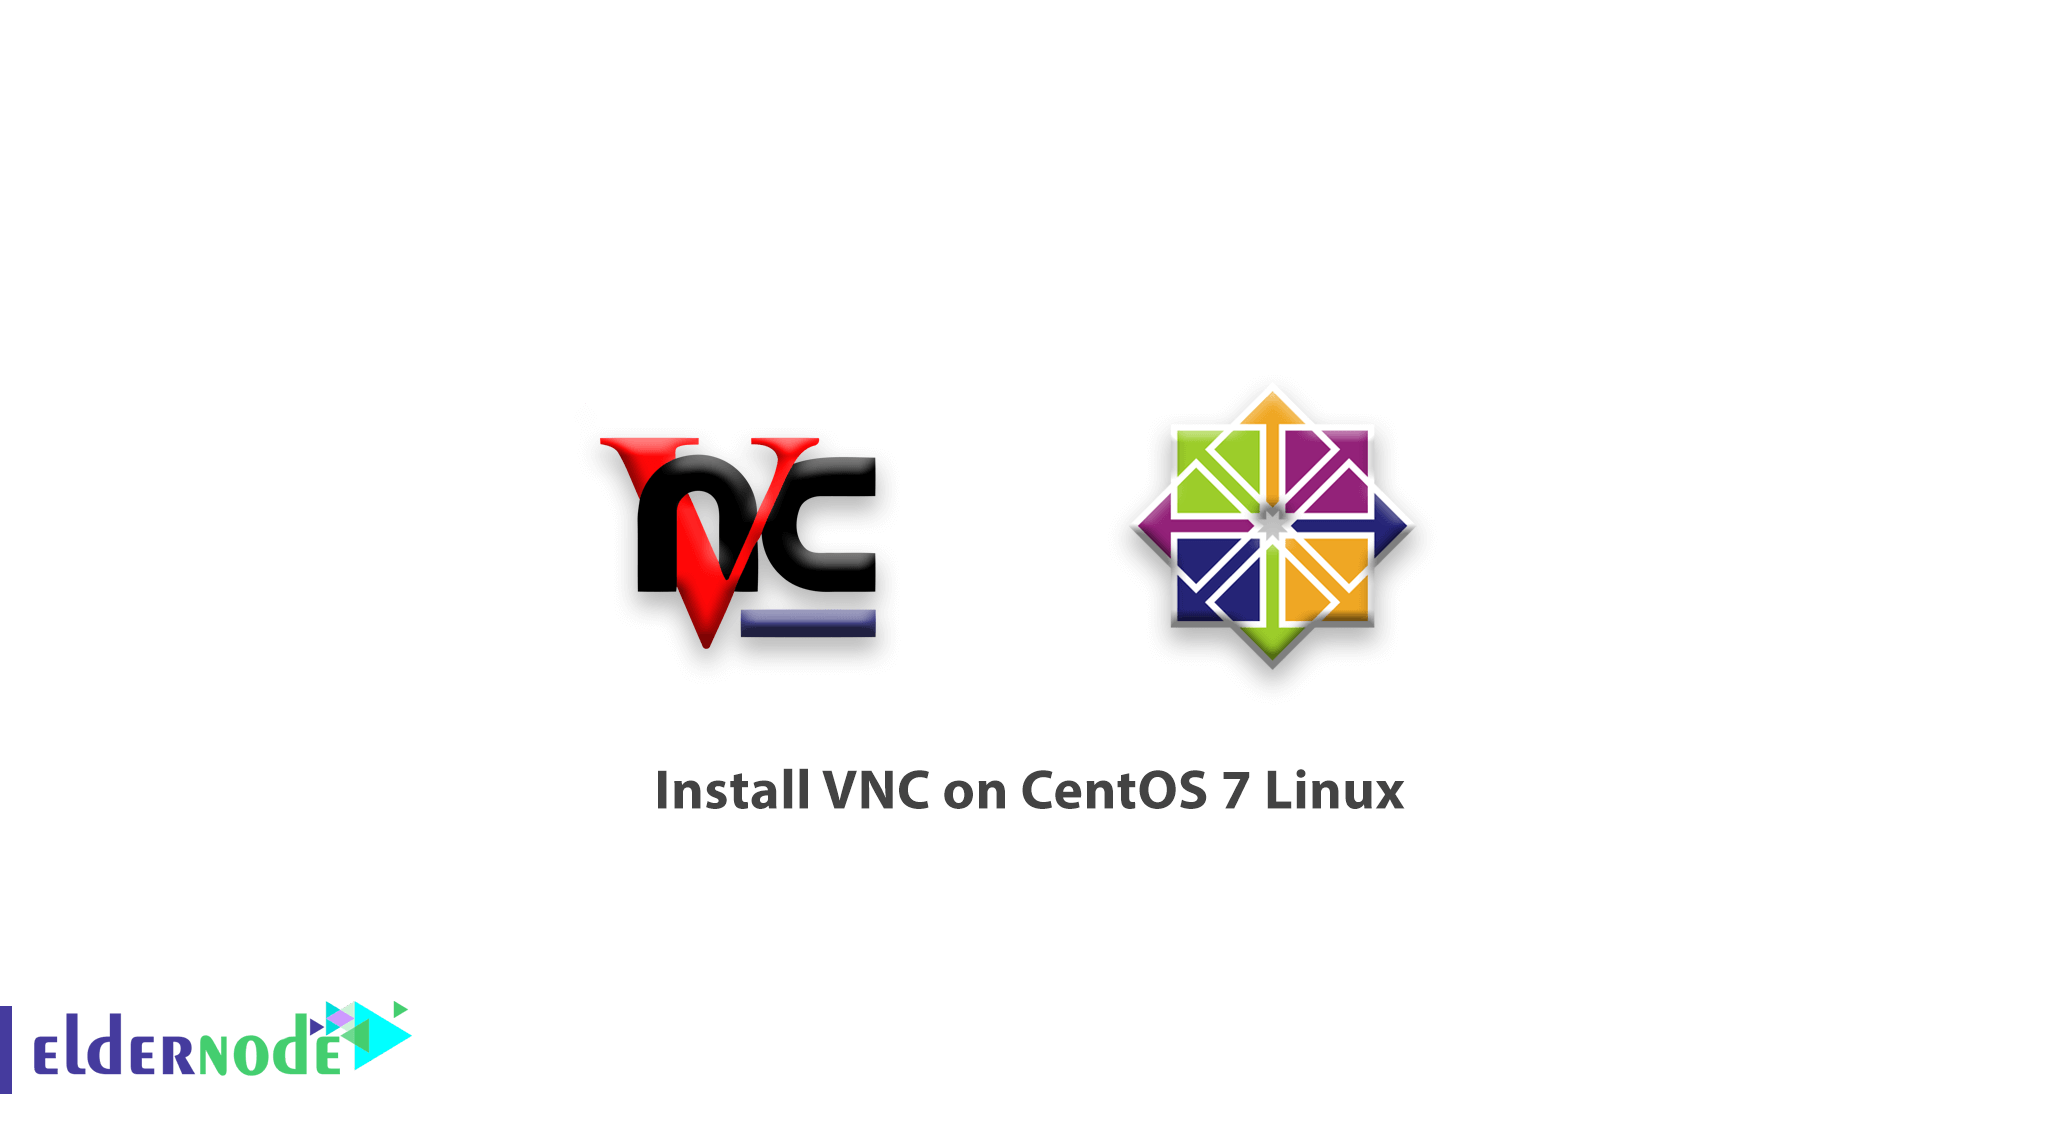 How to install VNC on CentOS 7 Linux